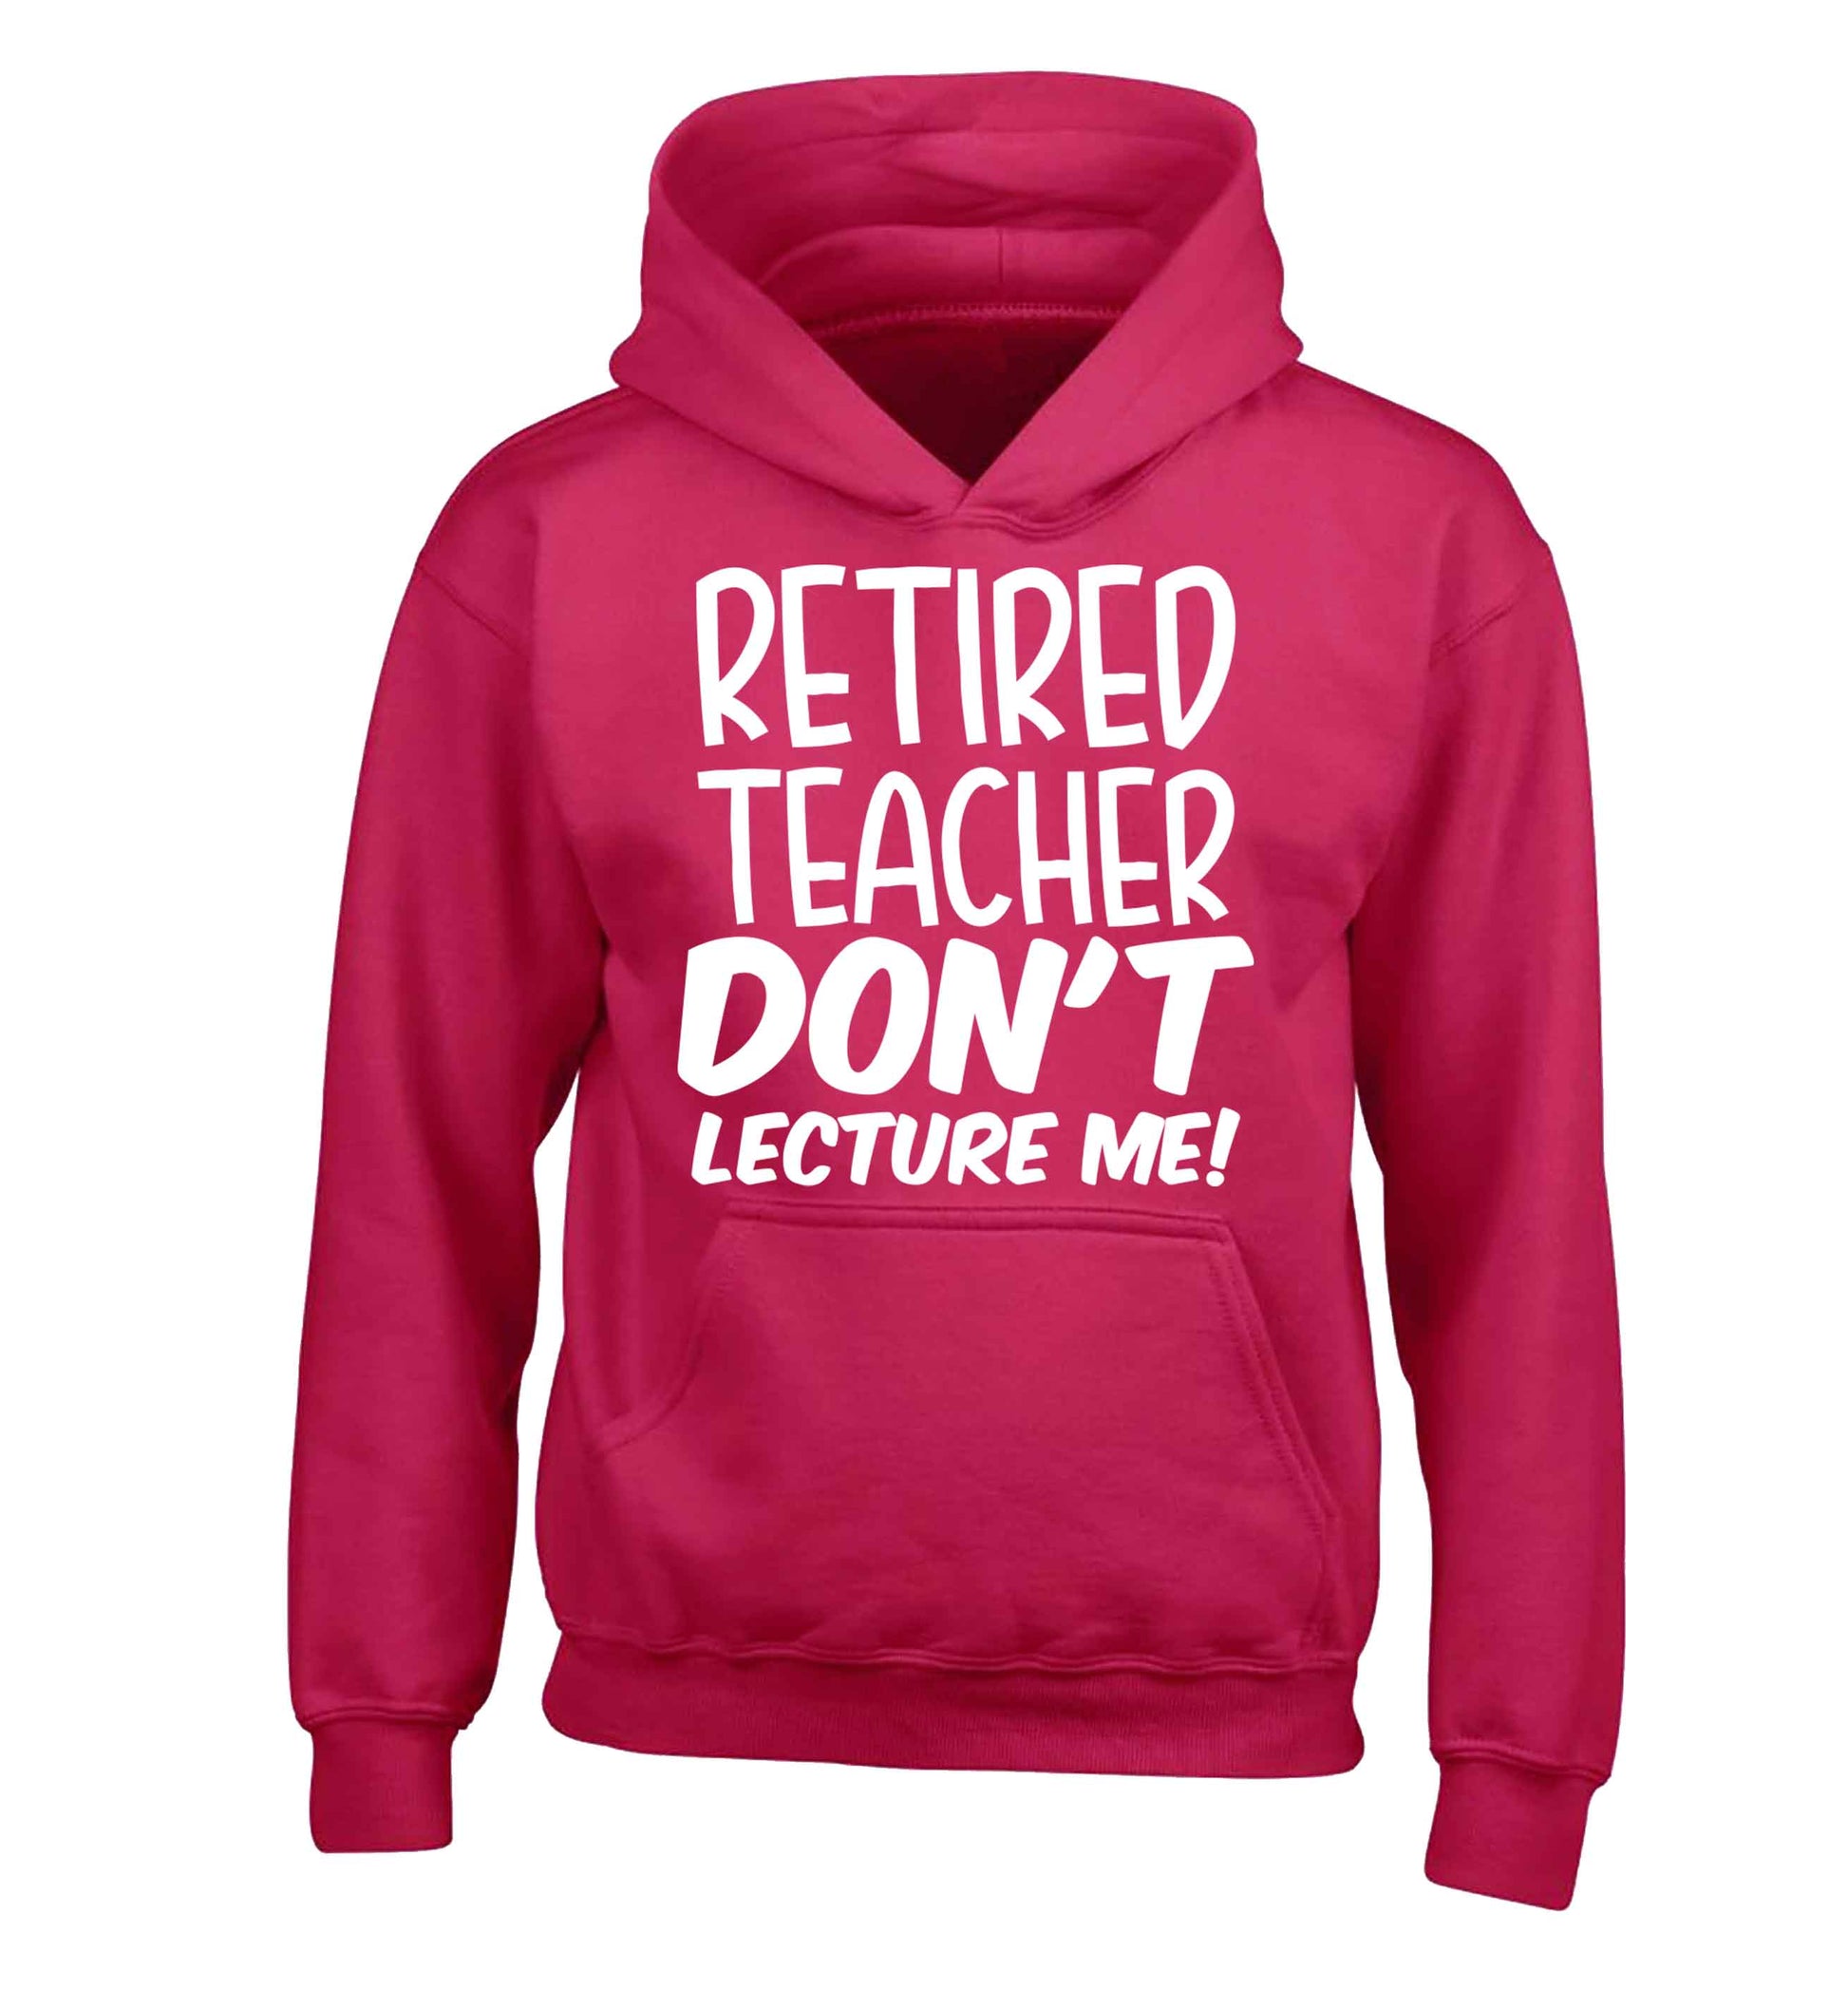 Retired teacher don't lecture me! children's pink hoodie 12-13 Years